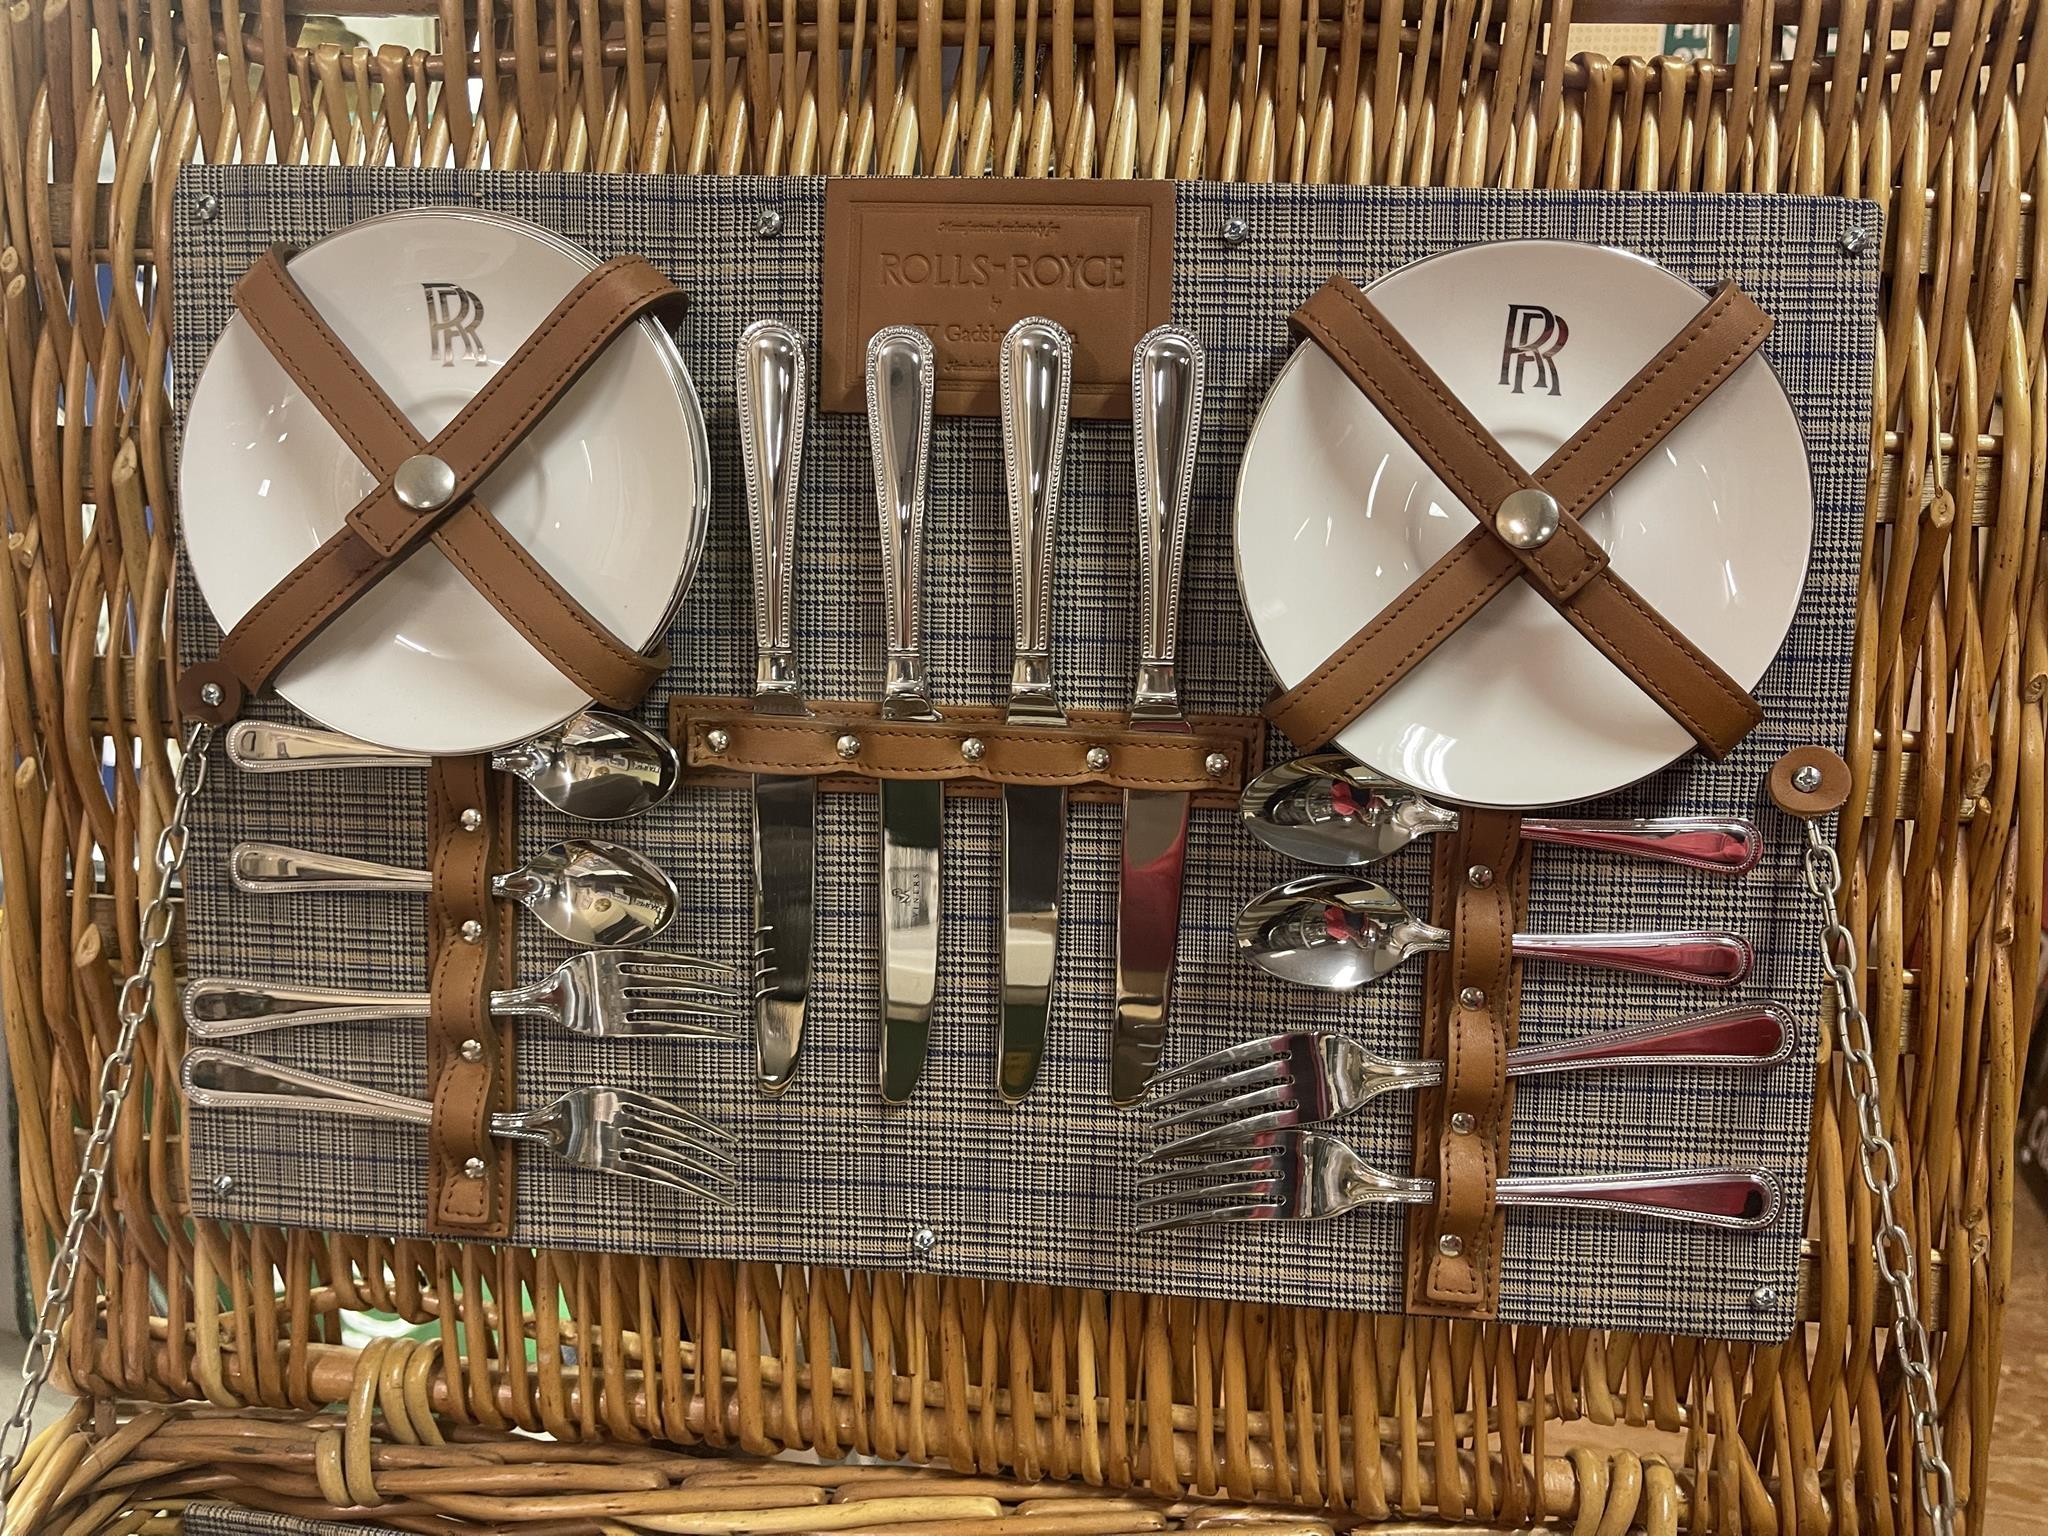 An official Rolls-Royce issue willow picnic hamper, by Gadsby & Co, for four persons, with